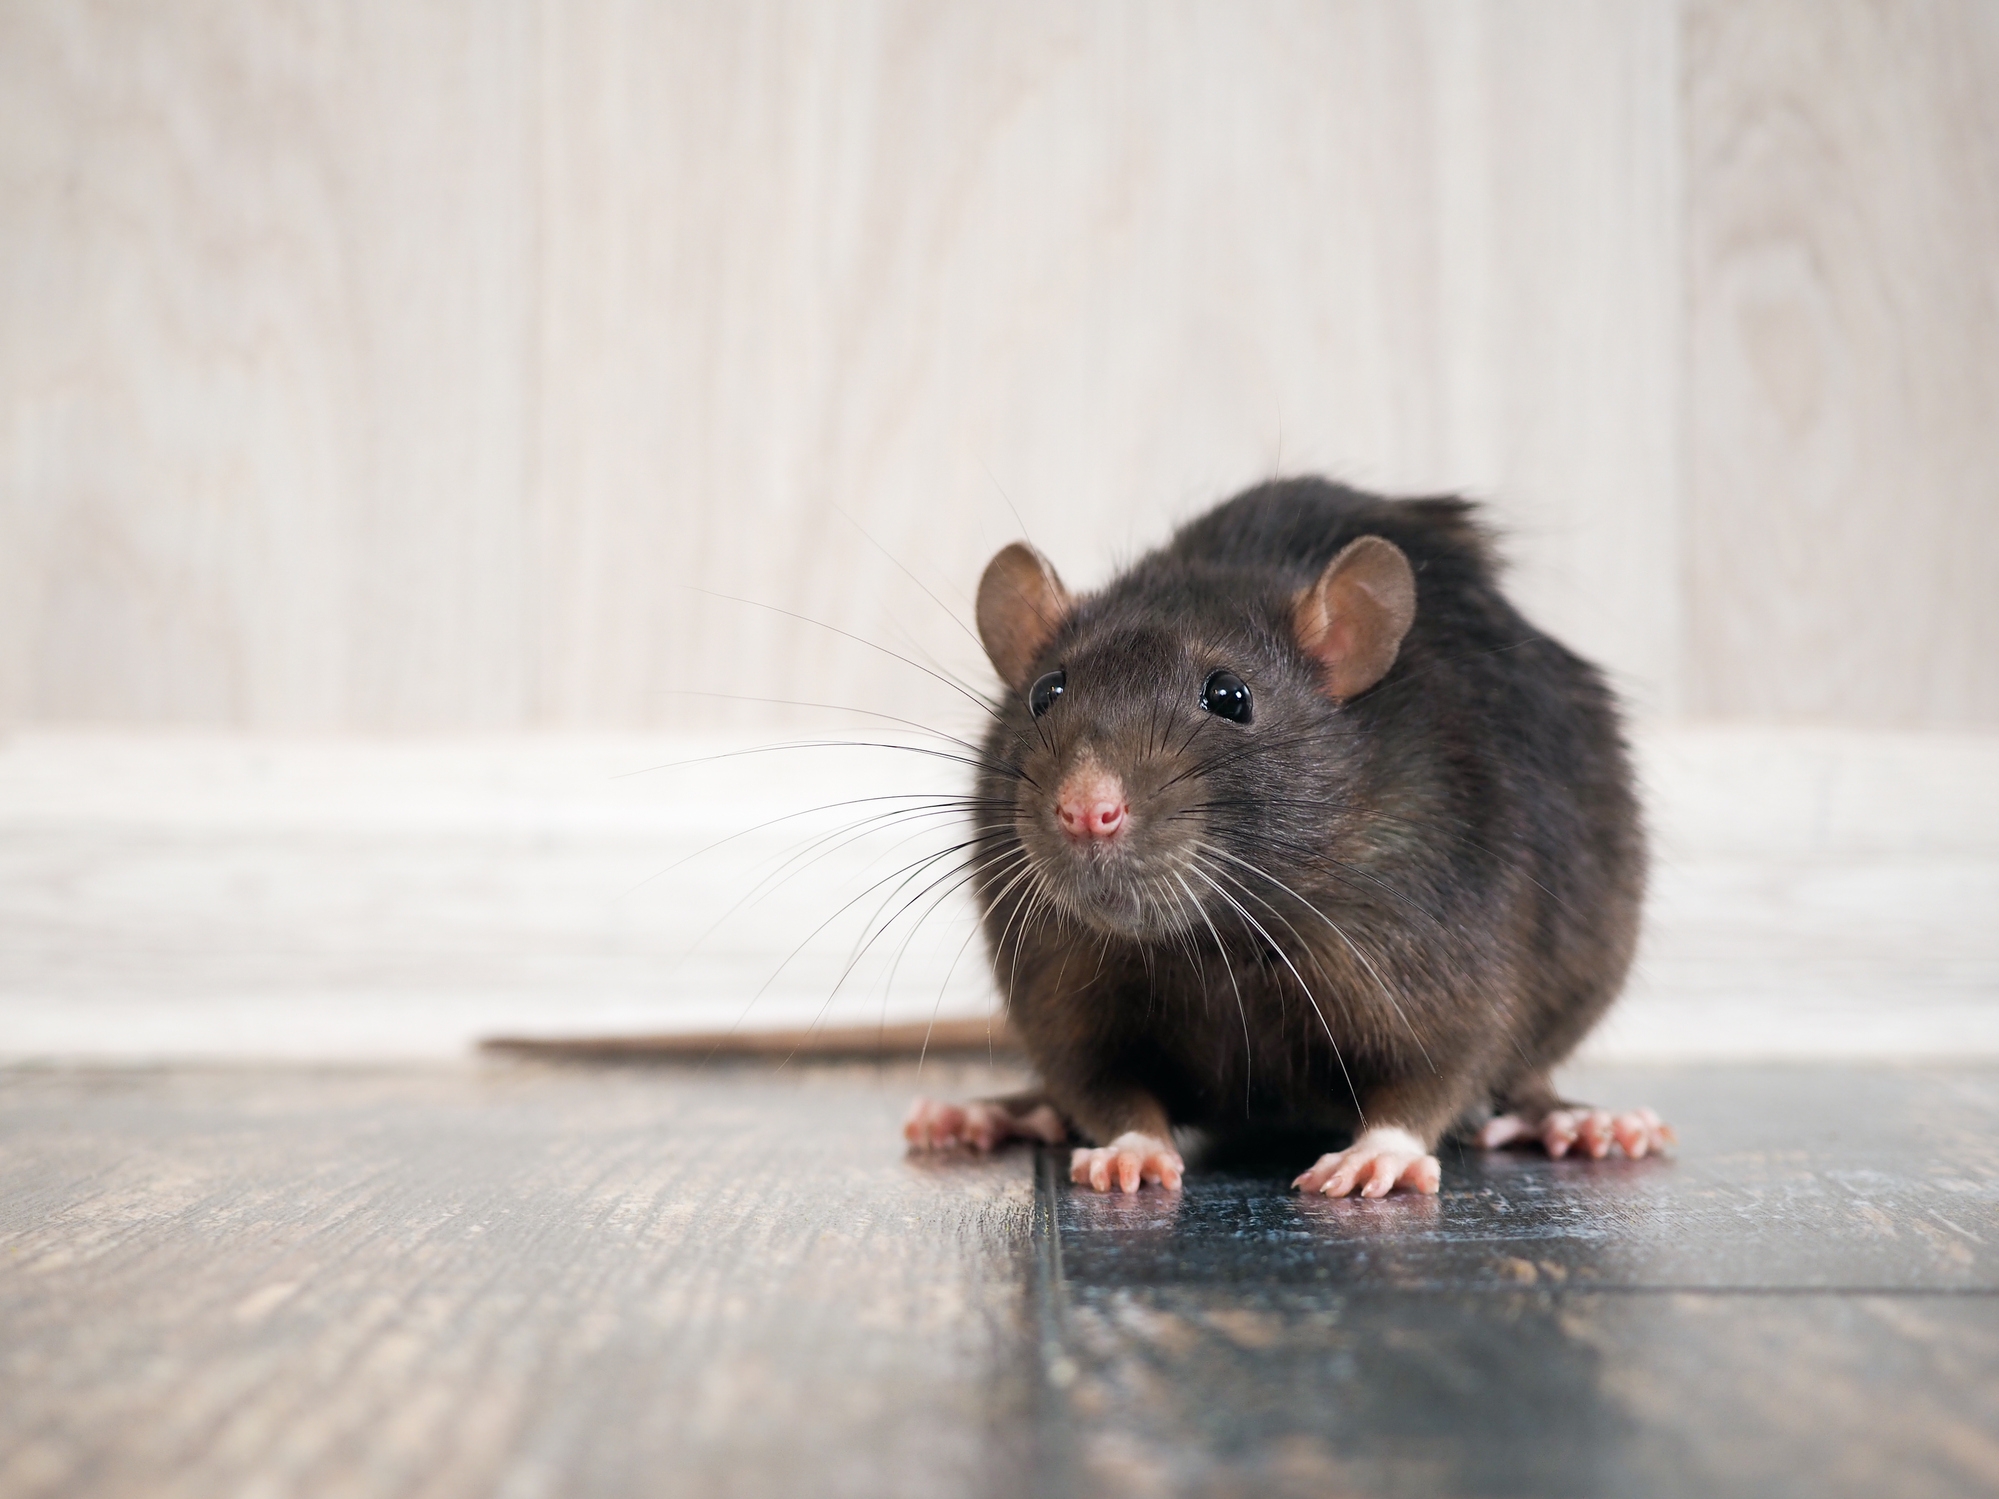 RAT APOCALYPSE! Toronto's new home invaders are growing in shocking numbers